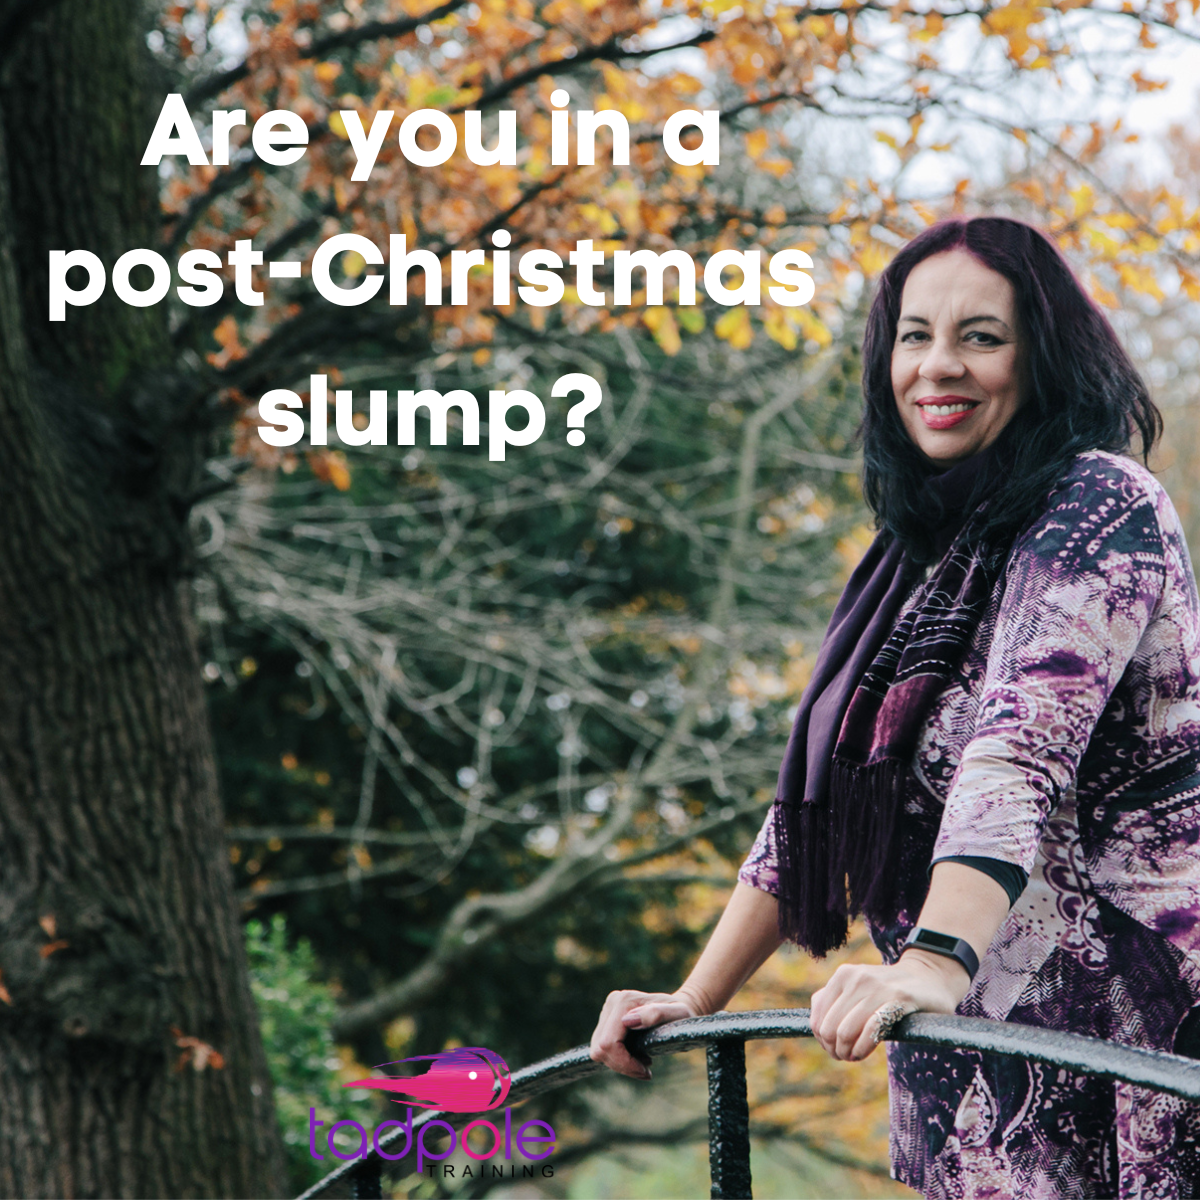 Are you in a post-Christmas sales slump?